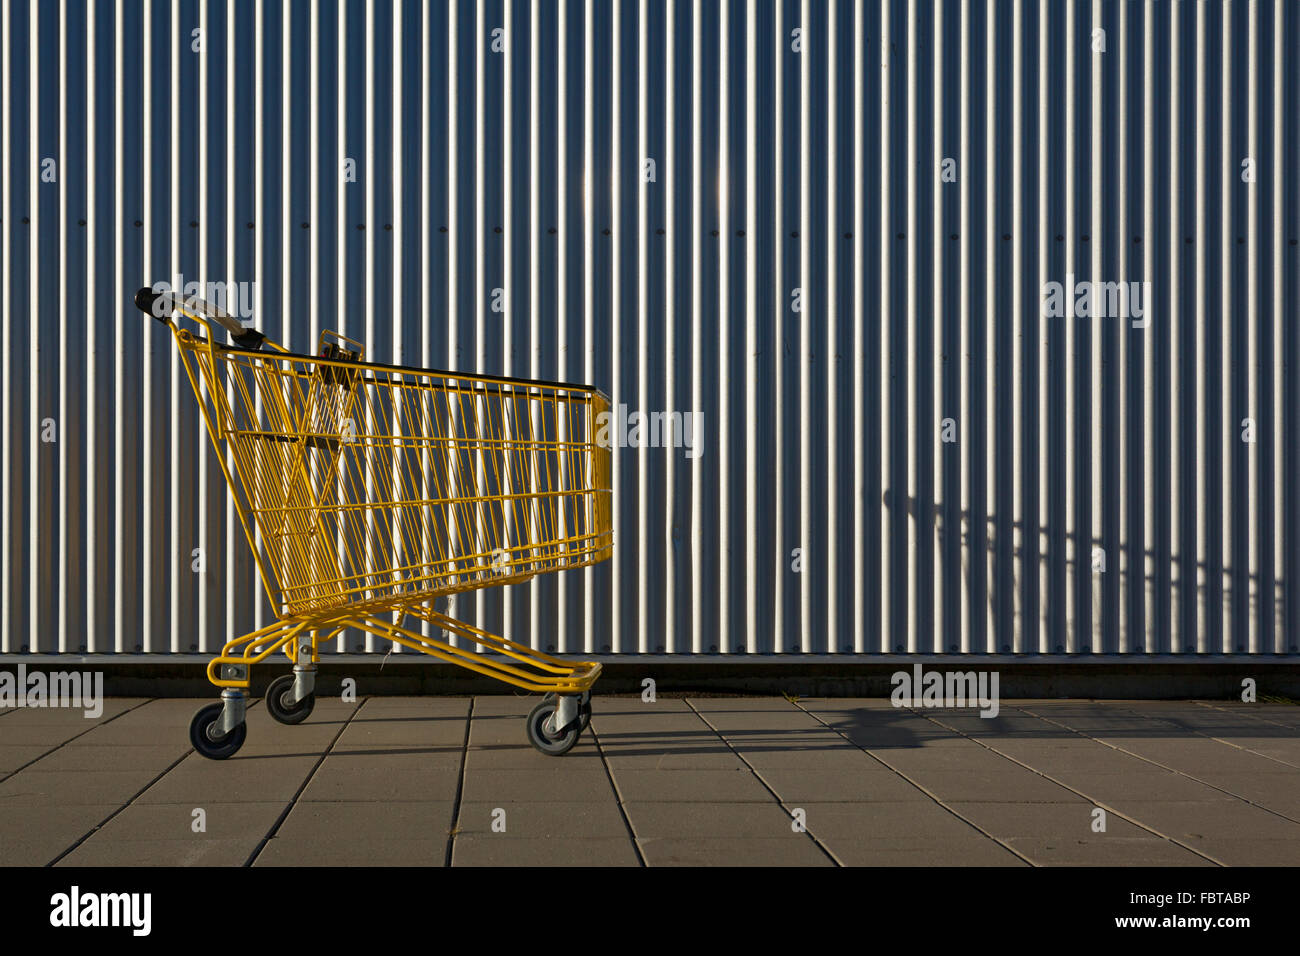 Yellow shopping trolley - abstract image Stock Photo